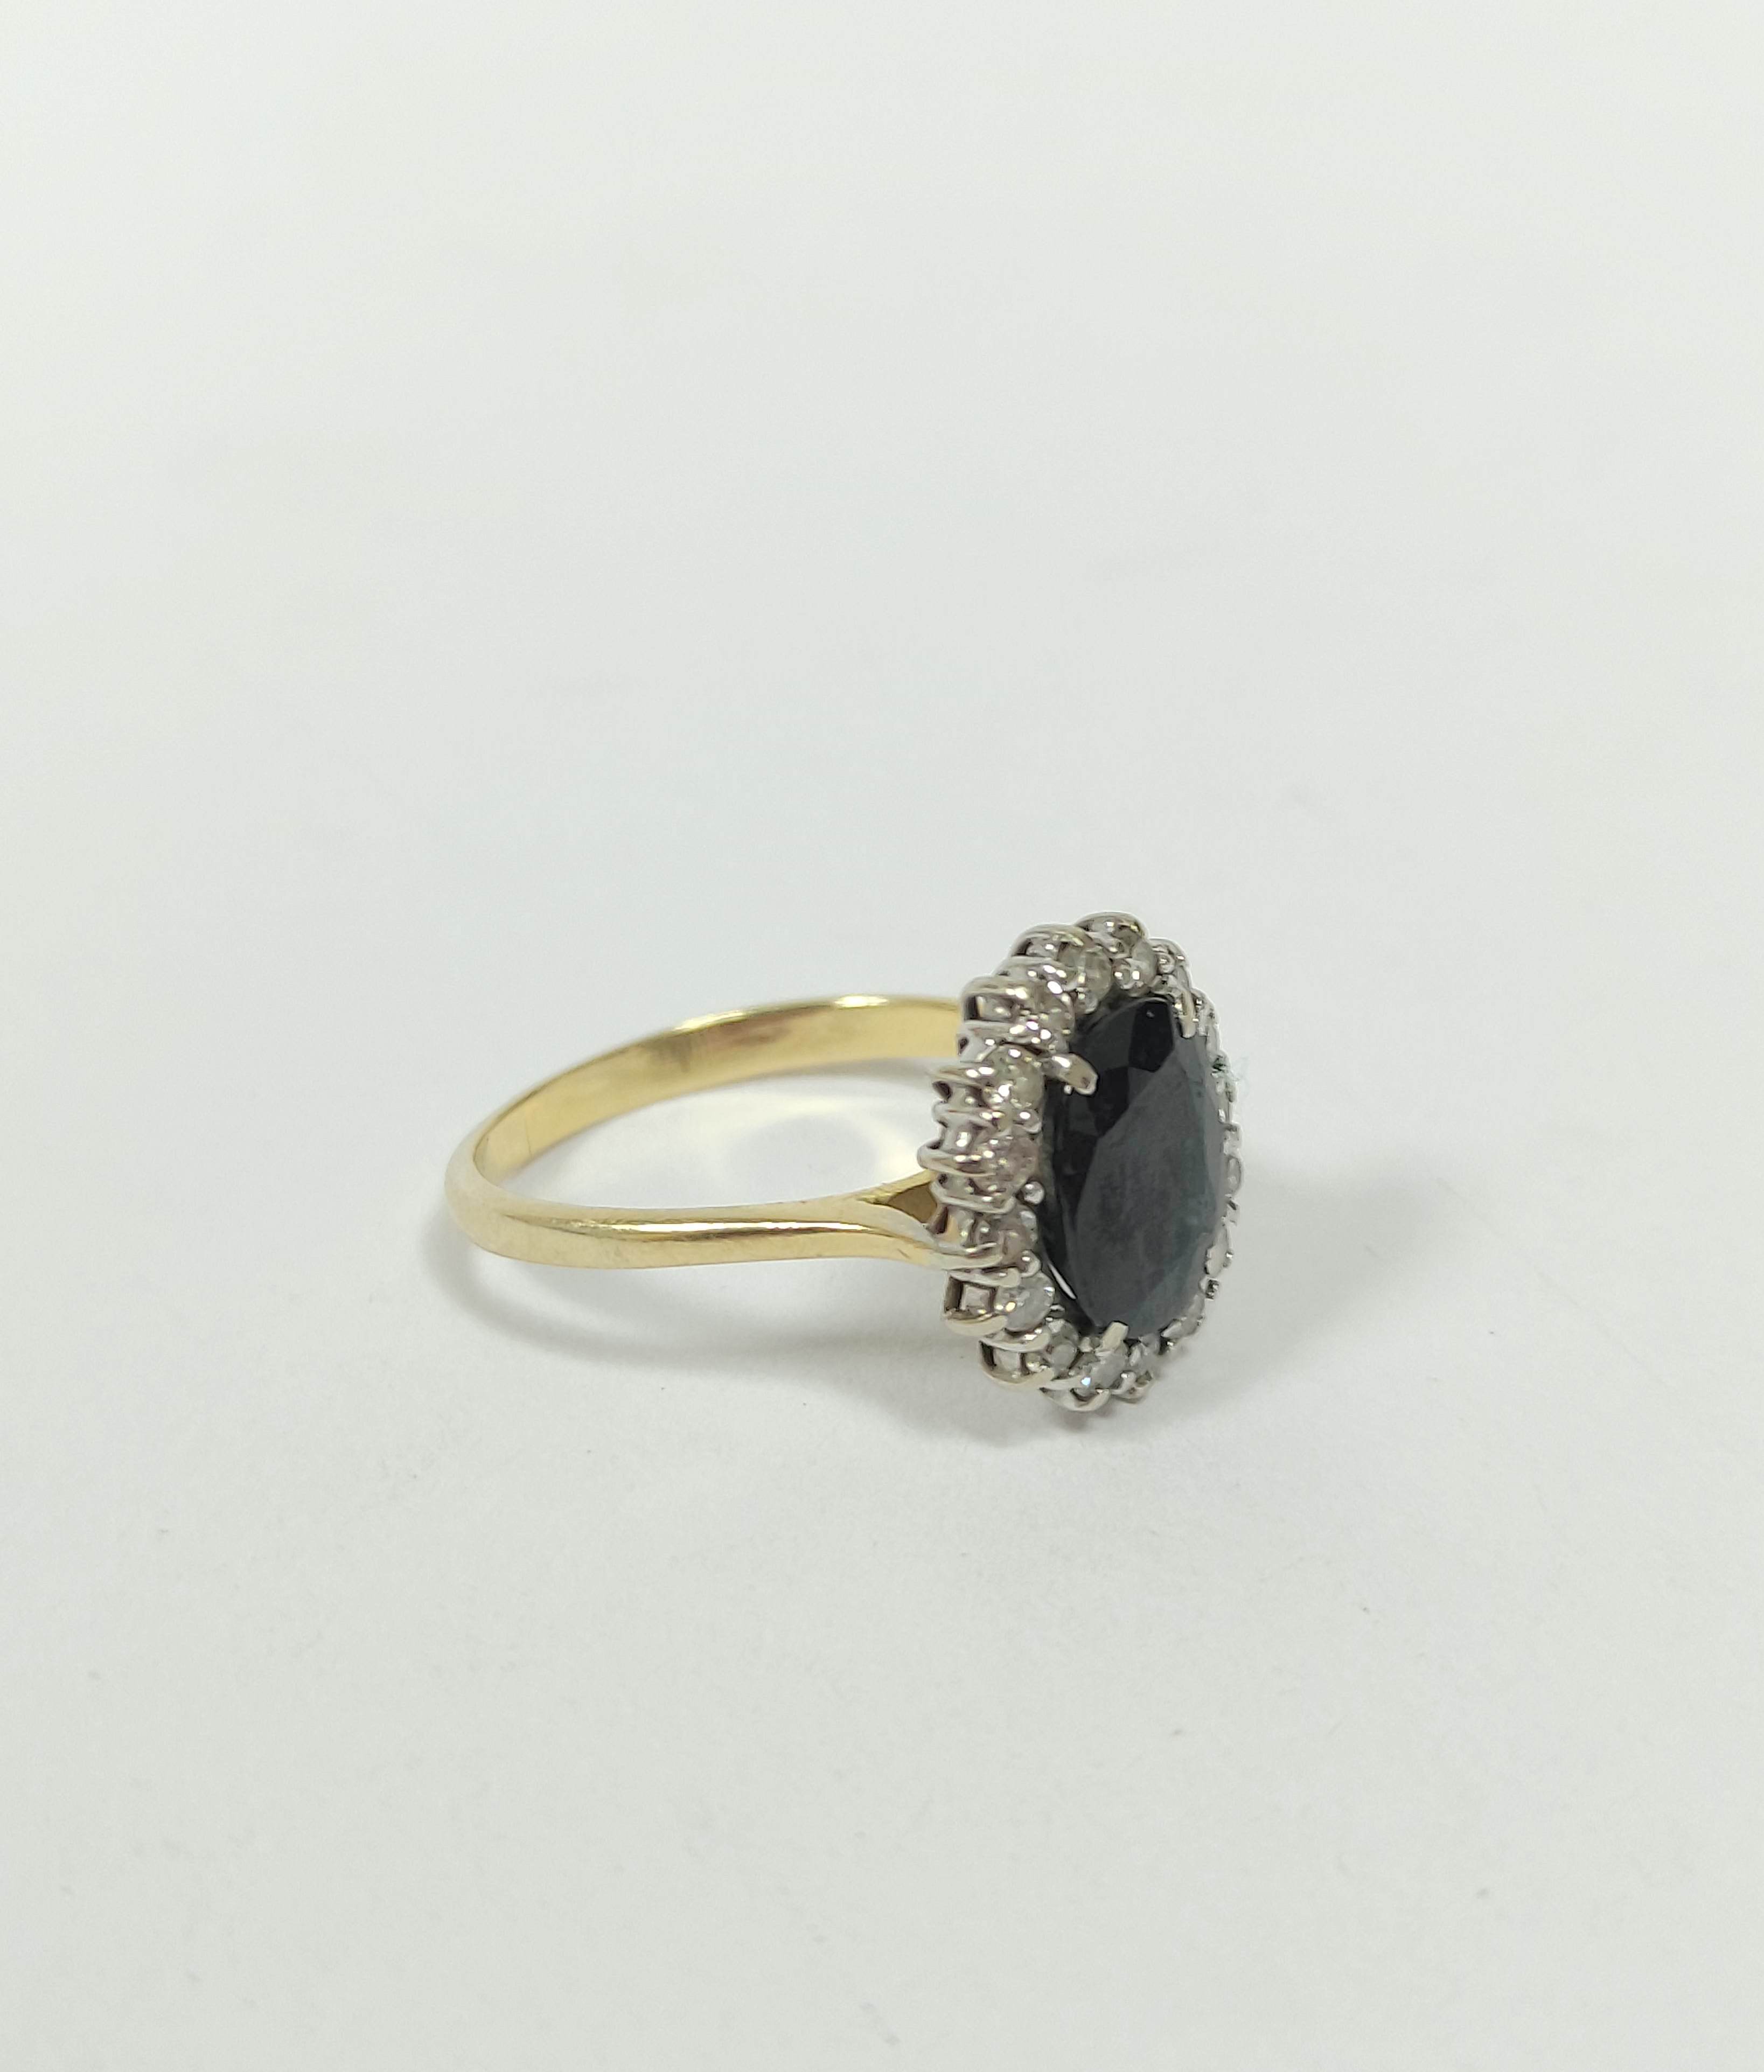 Diamond and sapphire oval cluster ring with small brilliants in gold, '18ct', size 'P'.